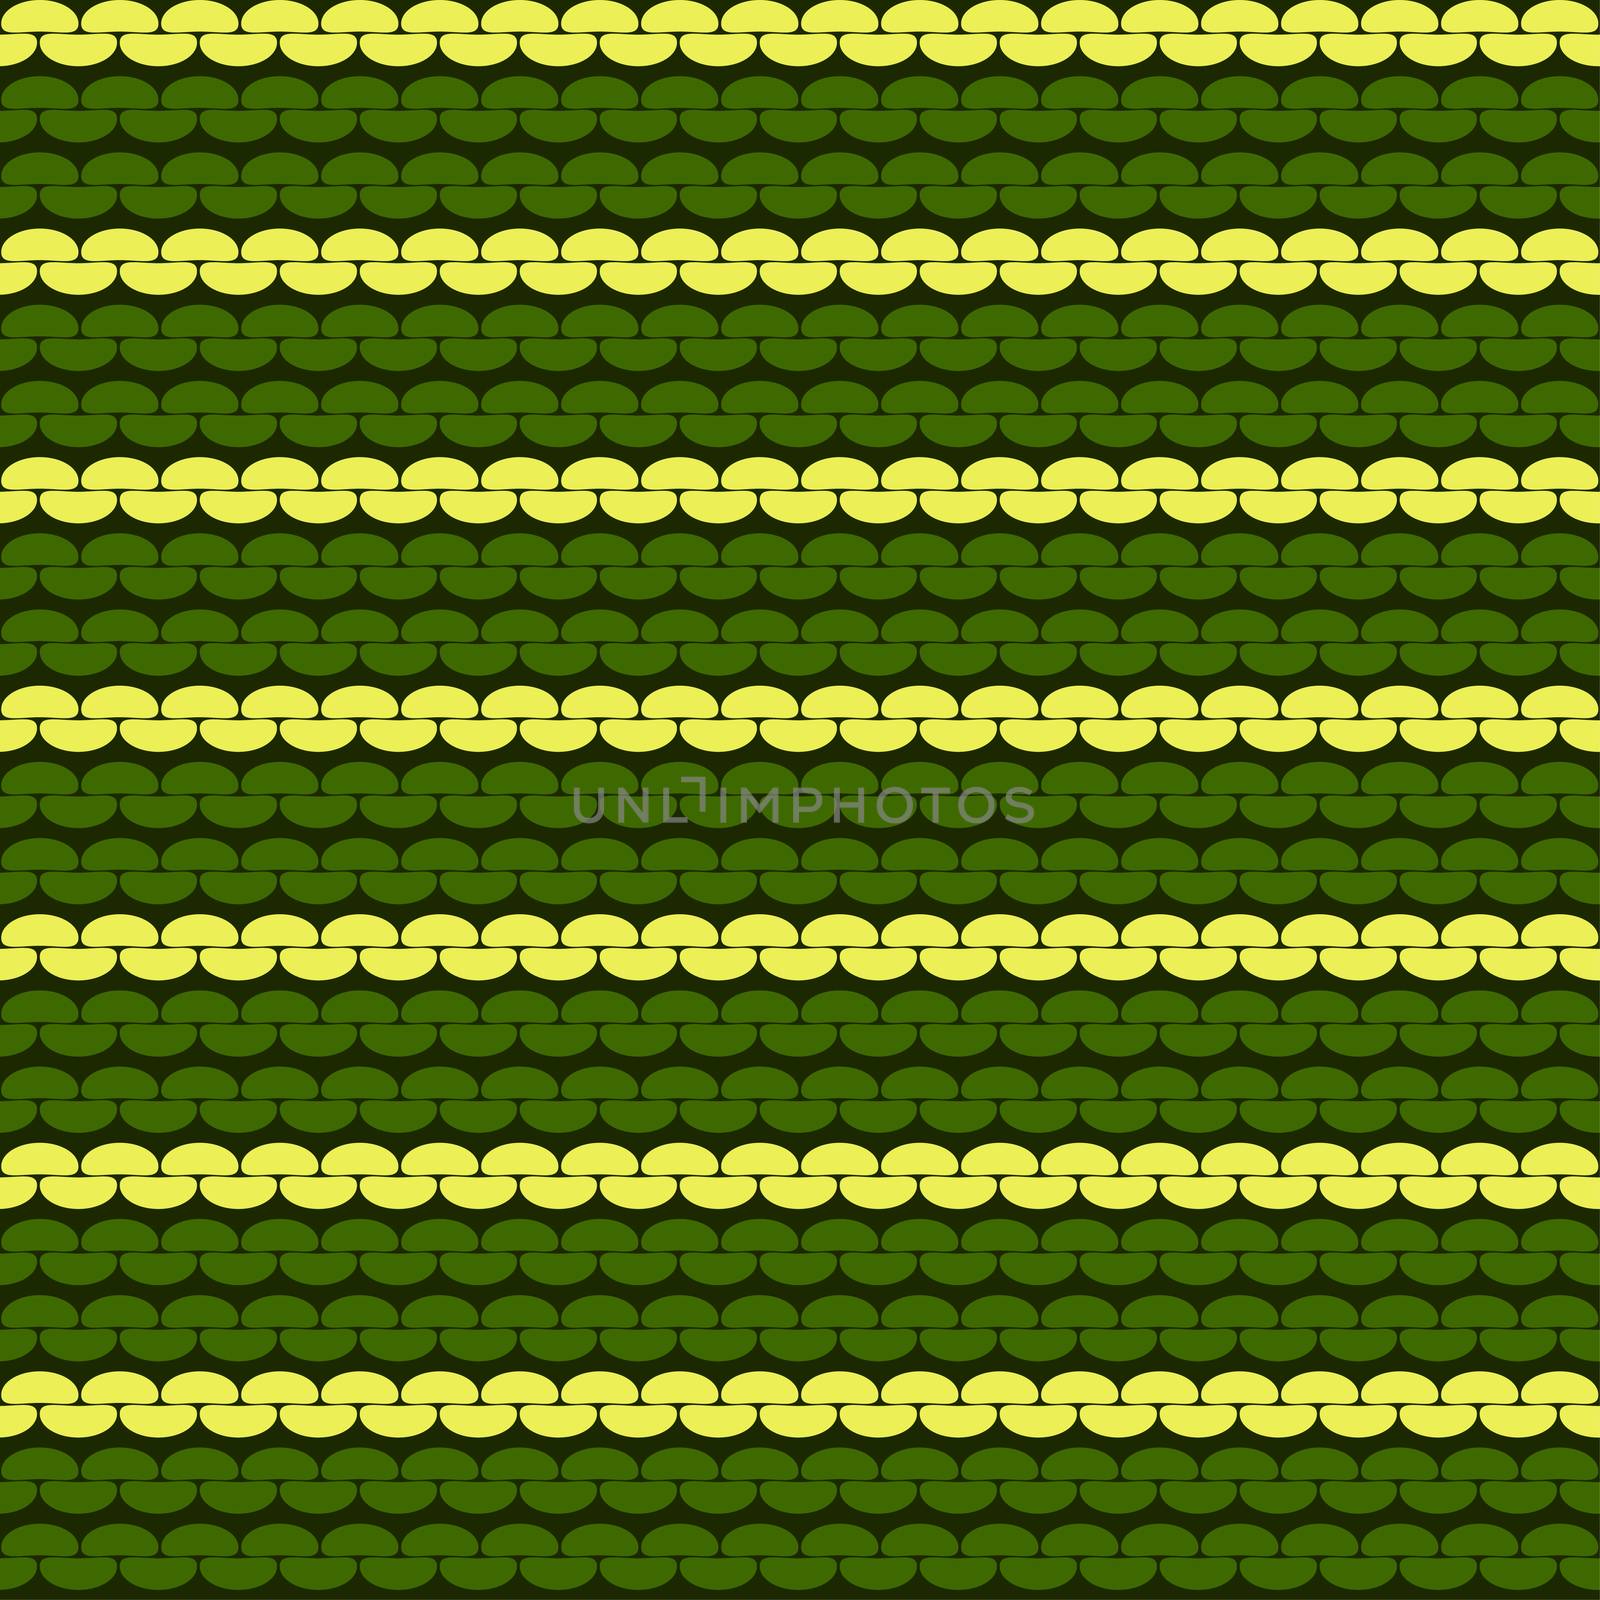 Seamless knitted background. Knitted realistic seamless pattern of green and yellow color. Reverse side.